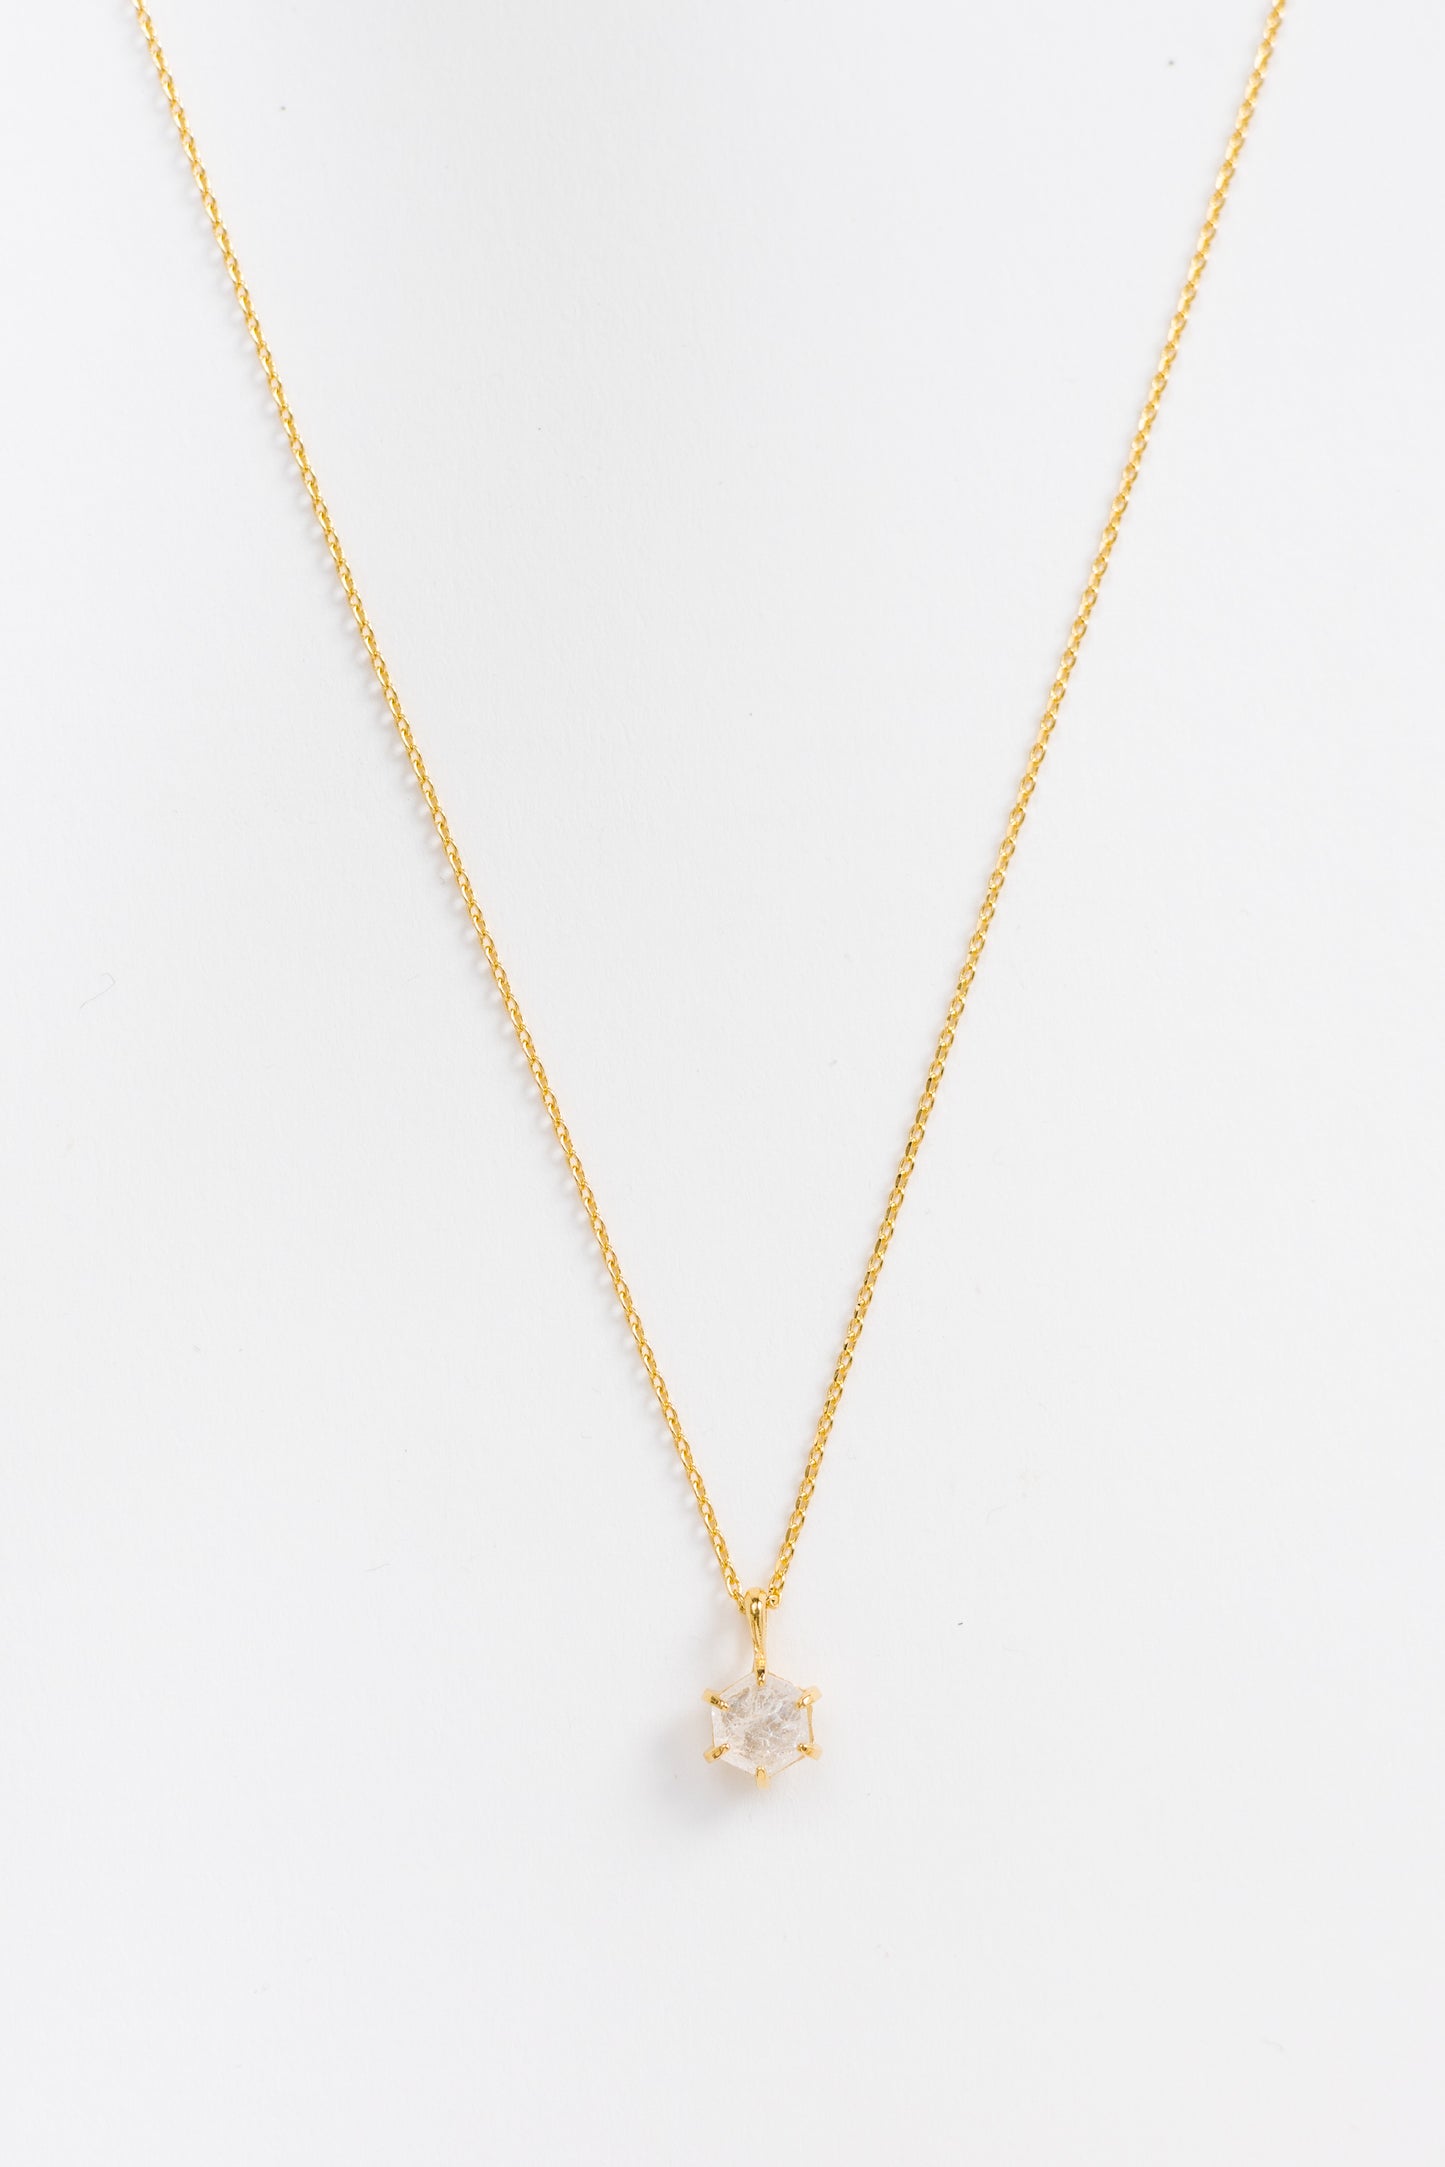 Cove Windsor Necklace